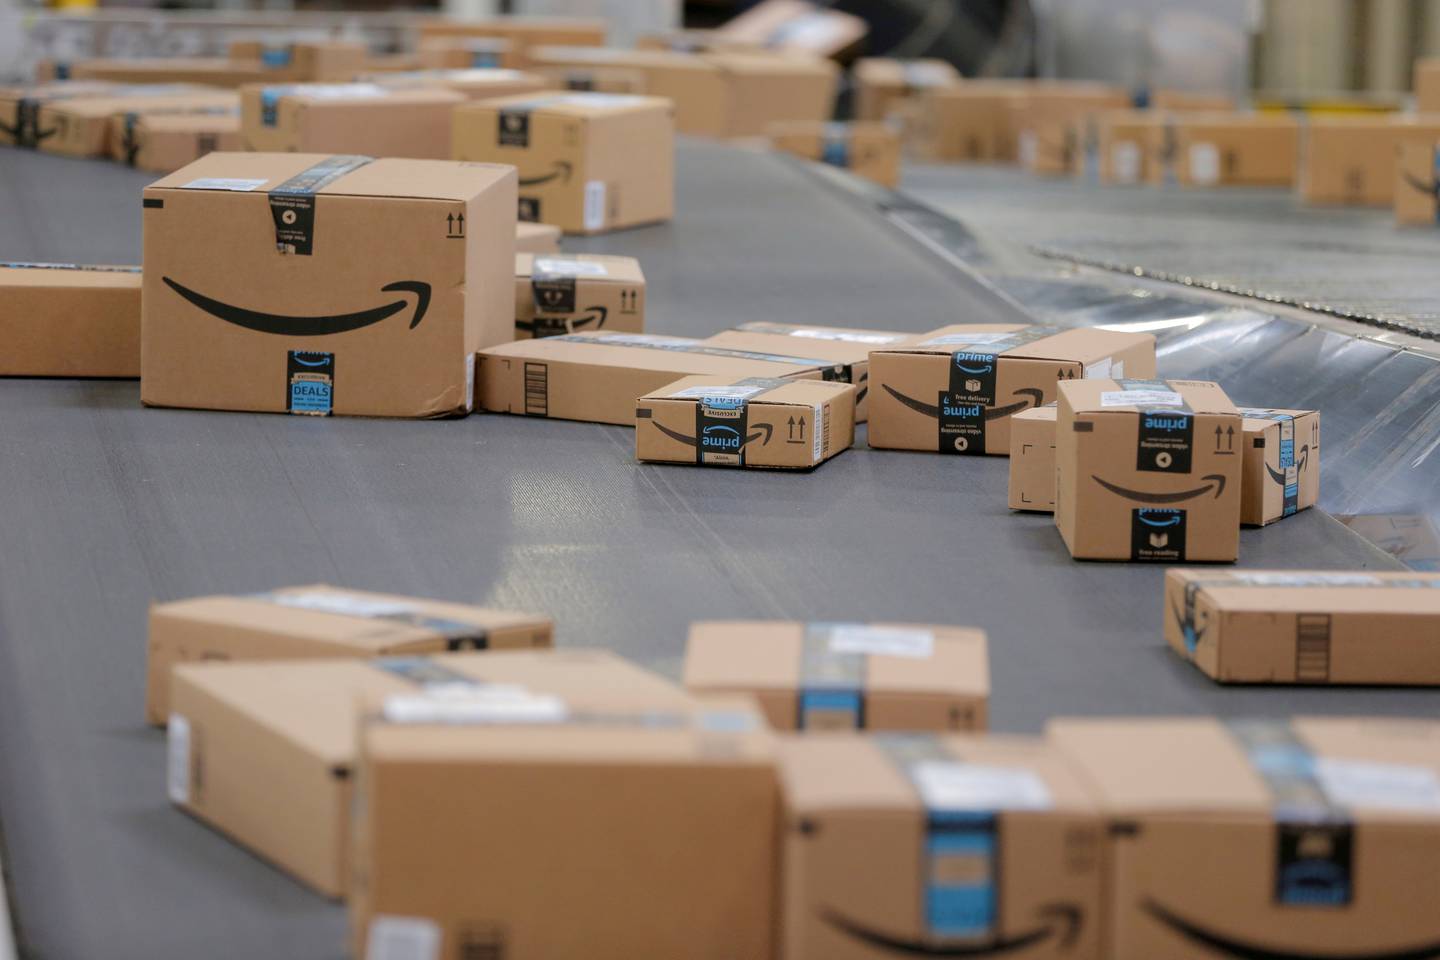 Amazon's online stores sales grew 16 per cent to $53.2bn in the second quarter. Reuters